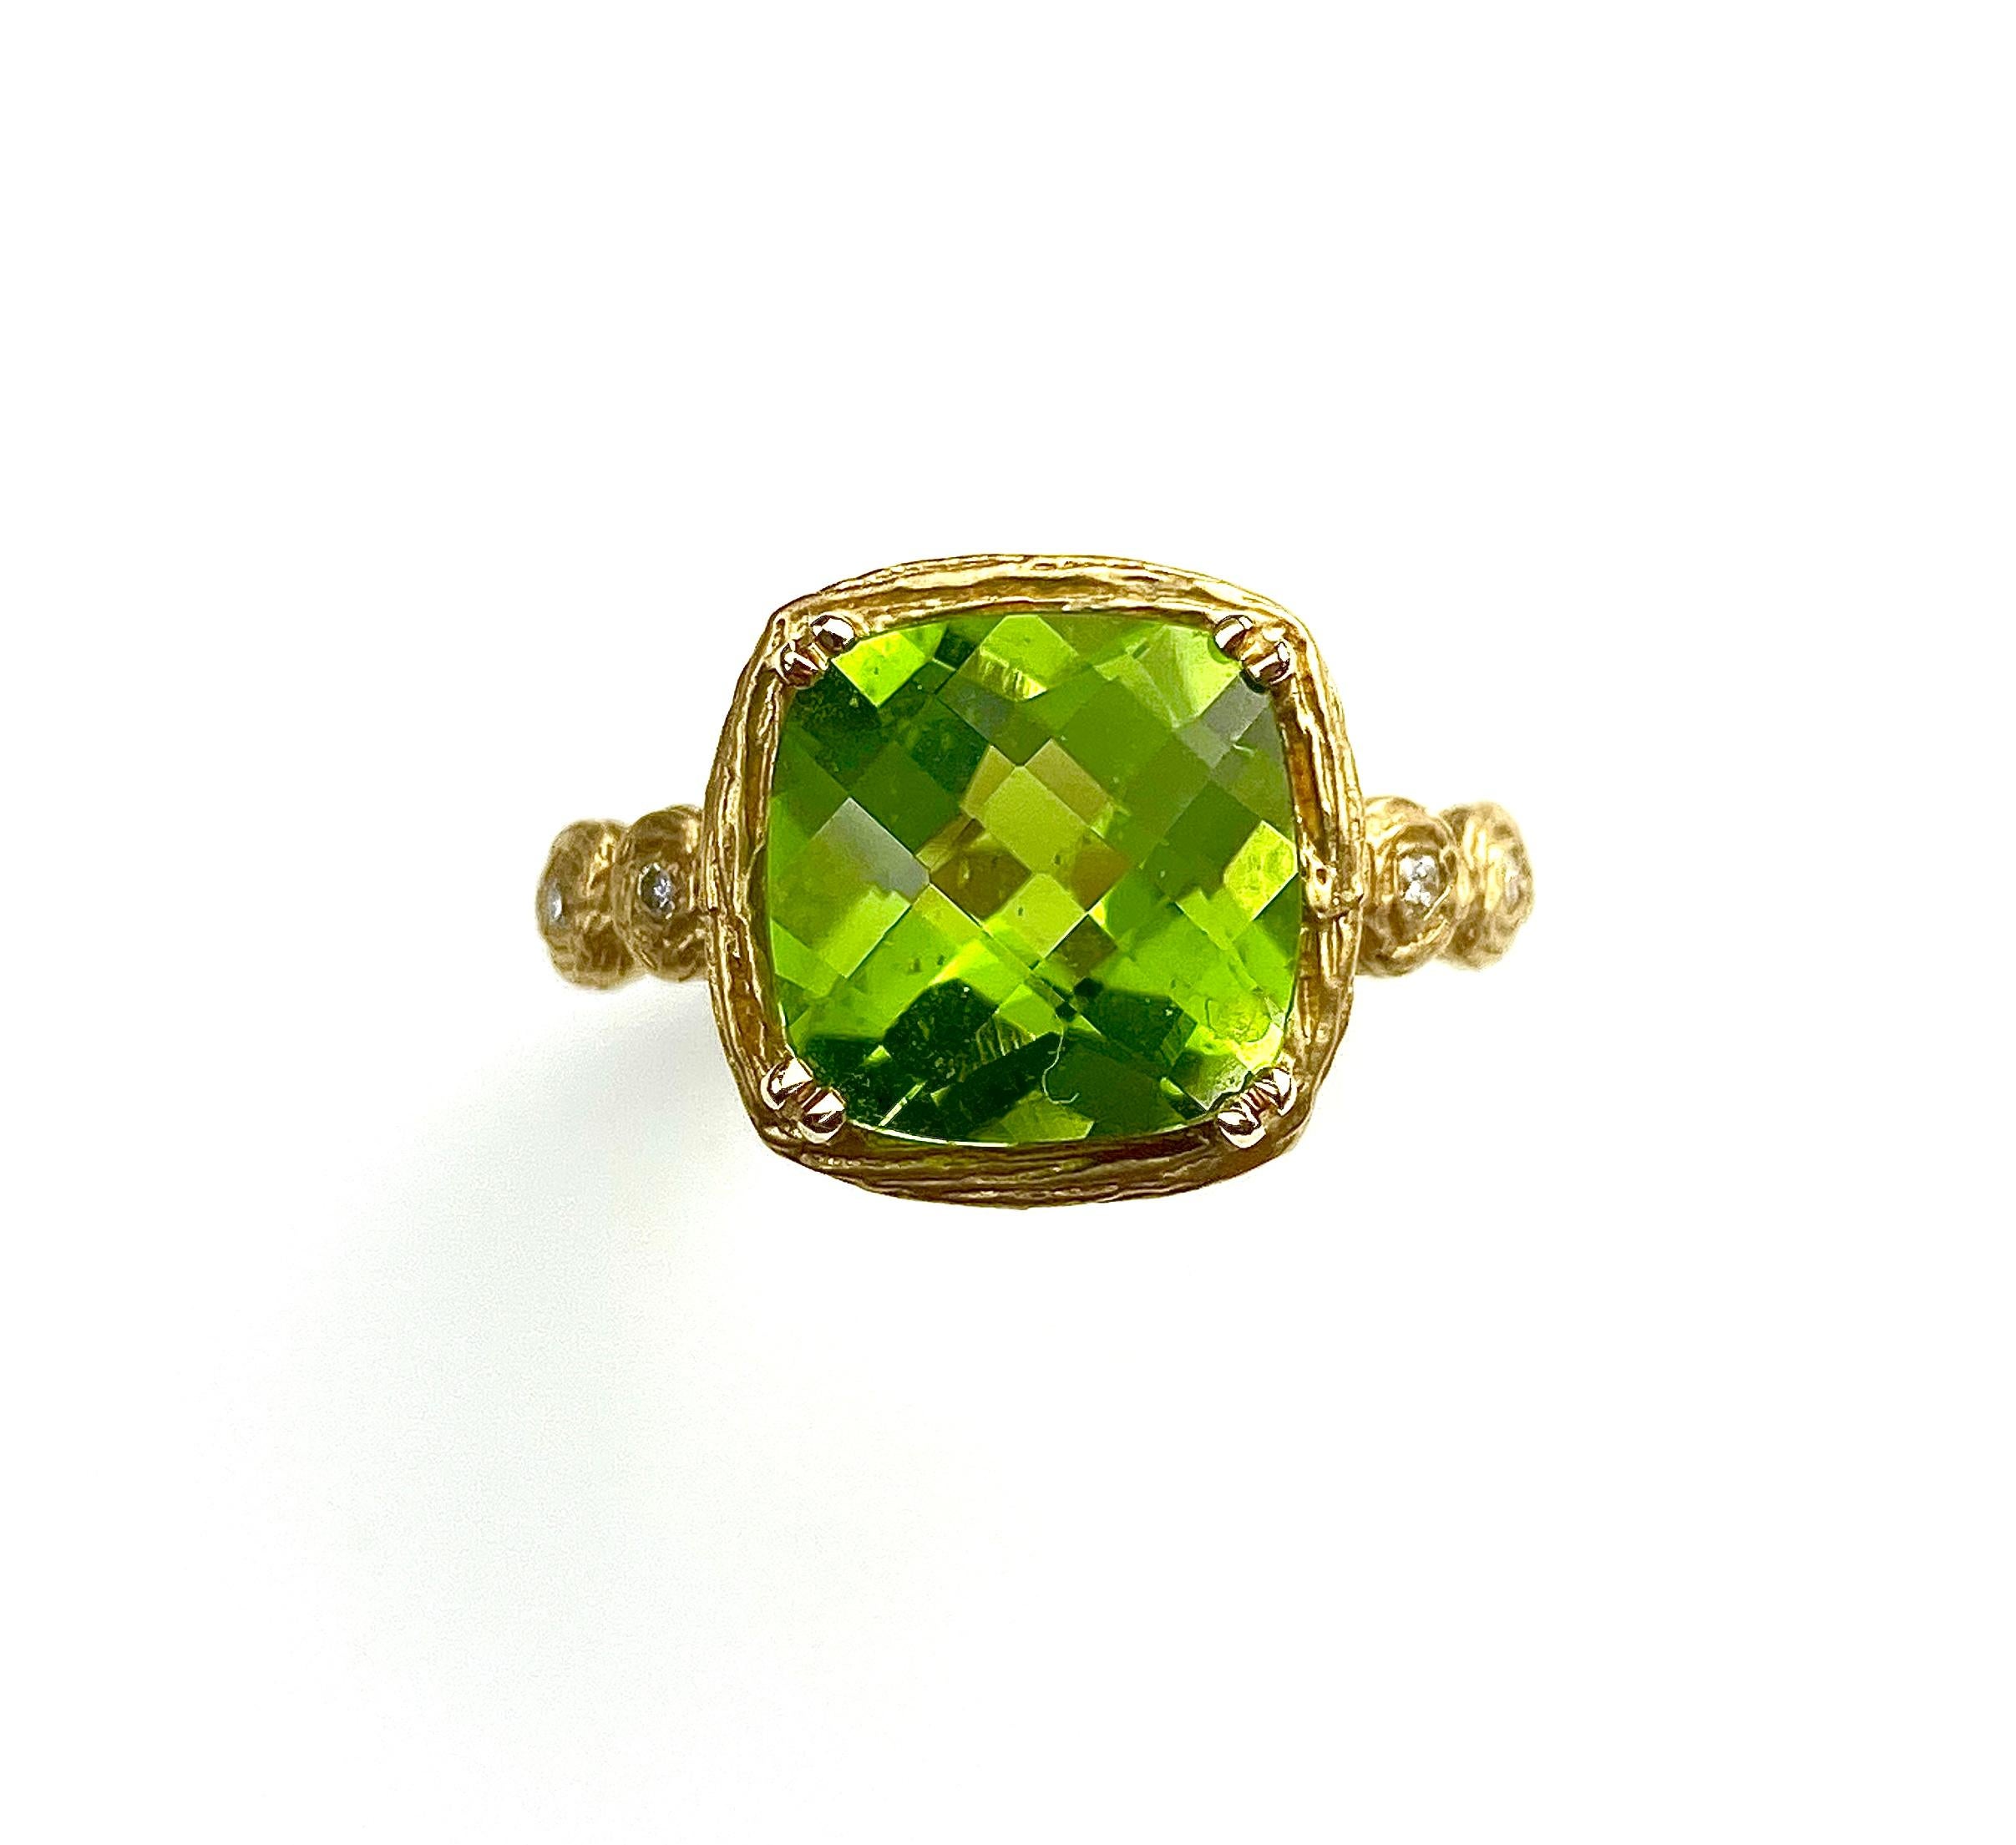 Branch textured cocktail ring with a 10mm square checkerboard cut Peridot, 4.79ct. Set with 4 small diamonds on the side totaling 0.05ct in 14kt yellow gold. Ring size 7. Ring resizing up or down two sizes included in pricing.